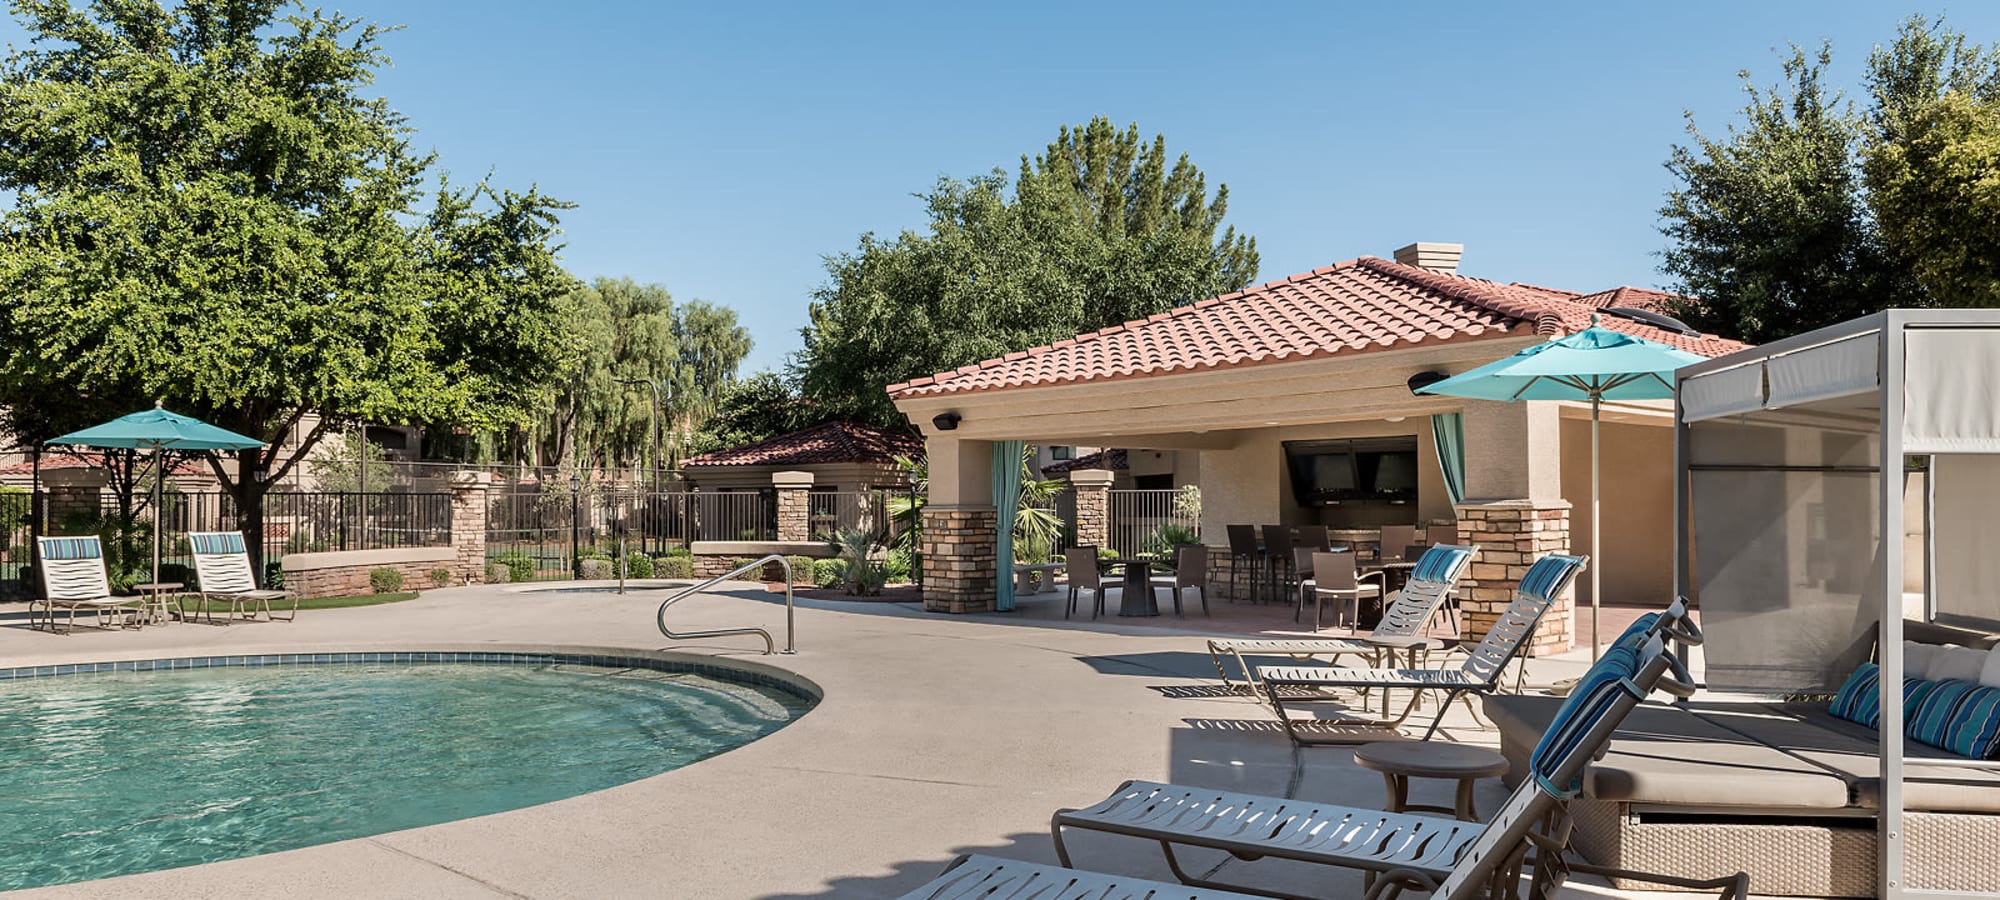 Beach-style swimming pool at San Cervantes in Chandler, Arizona